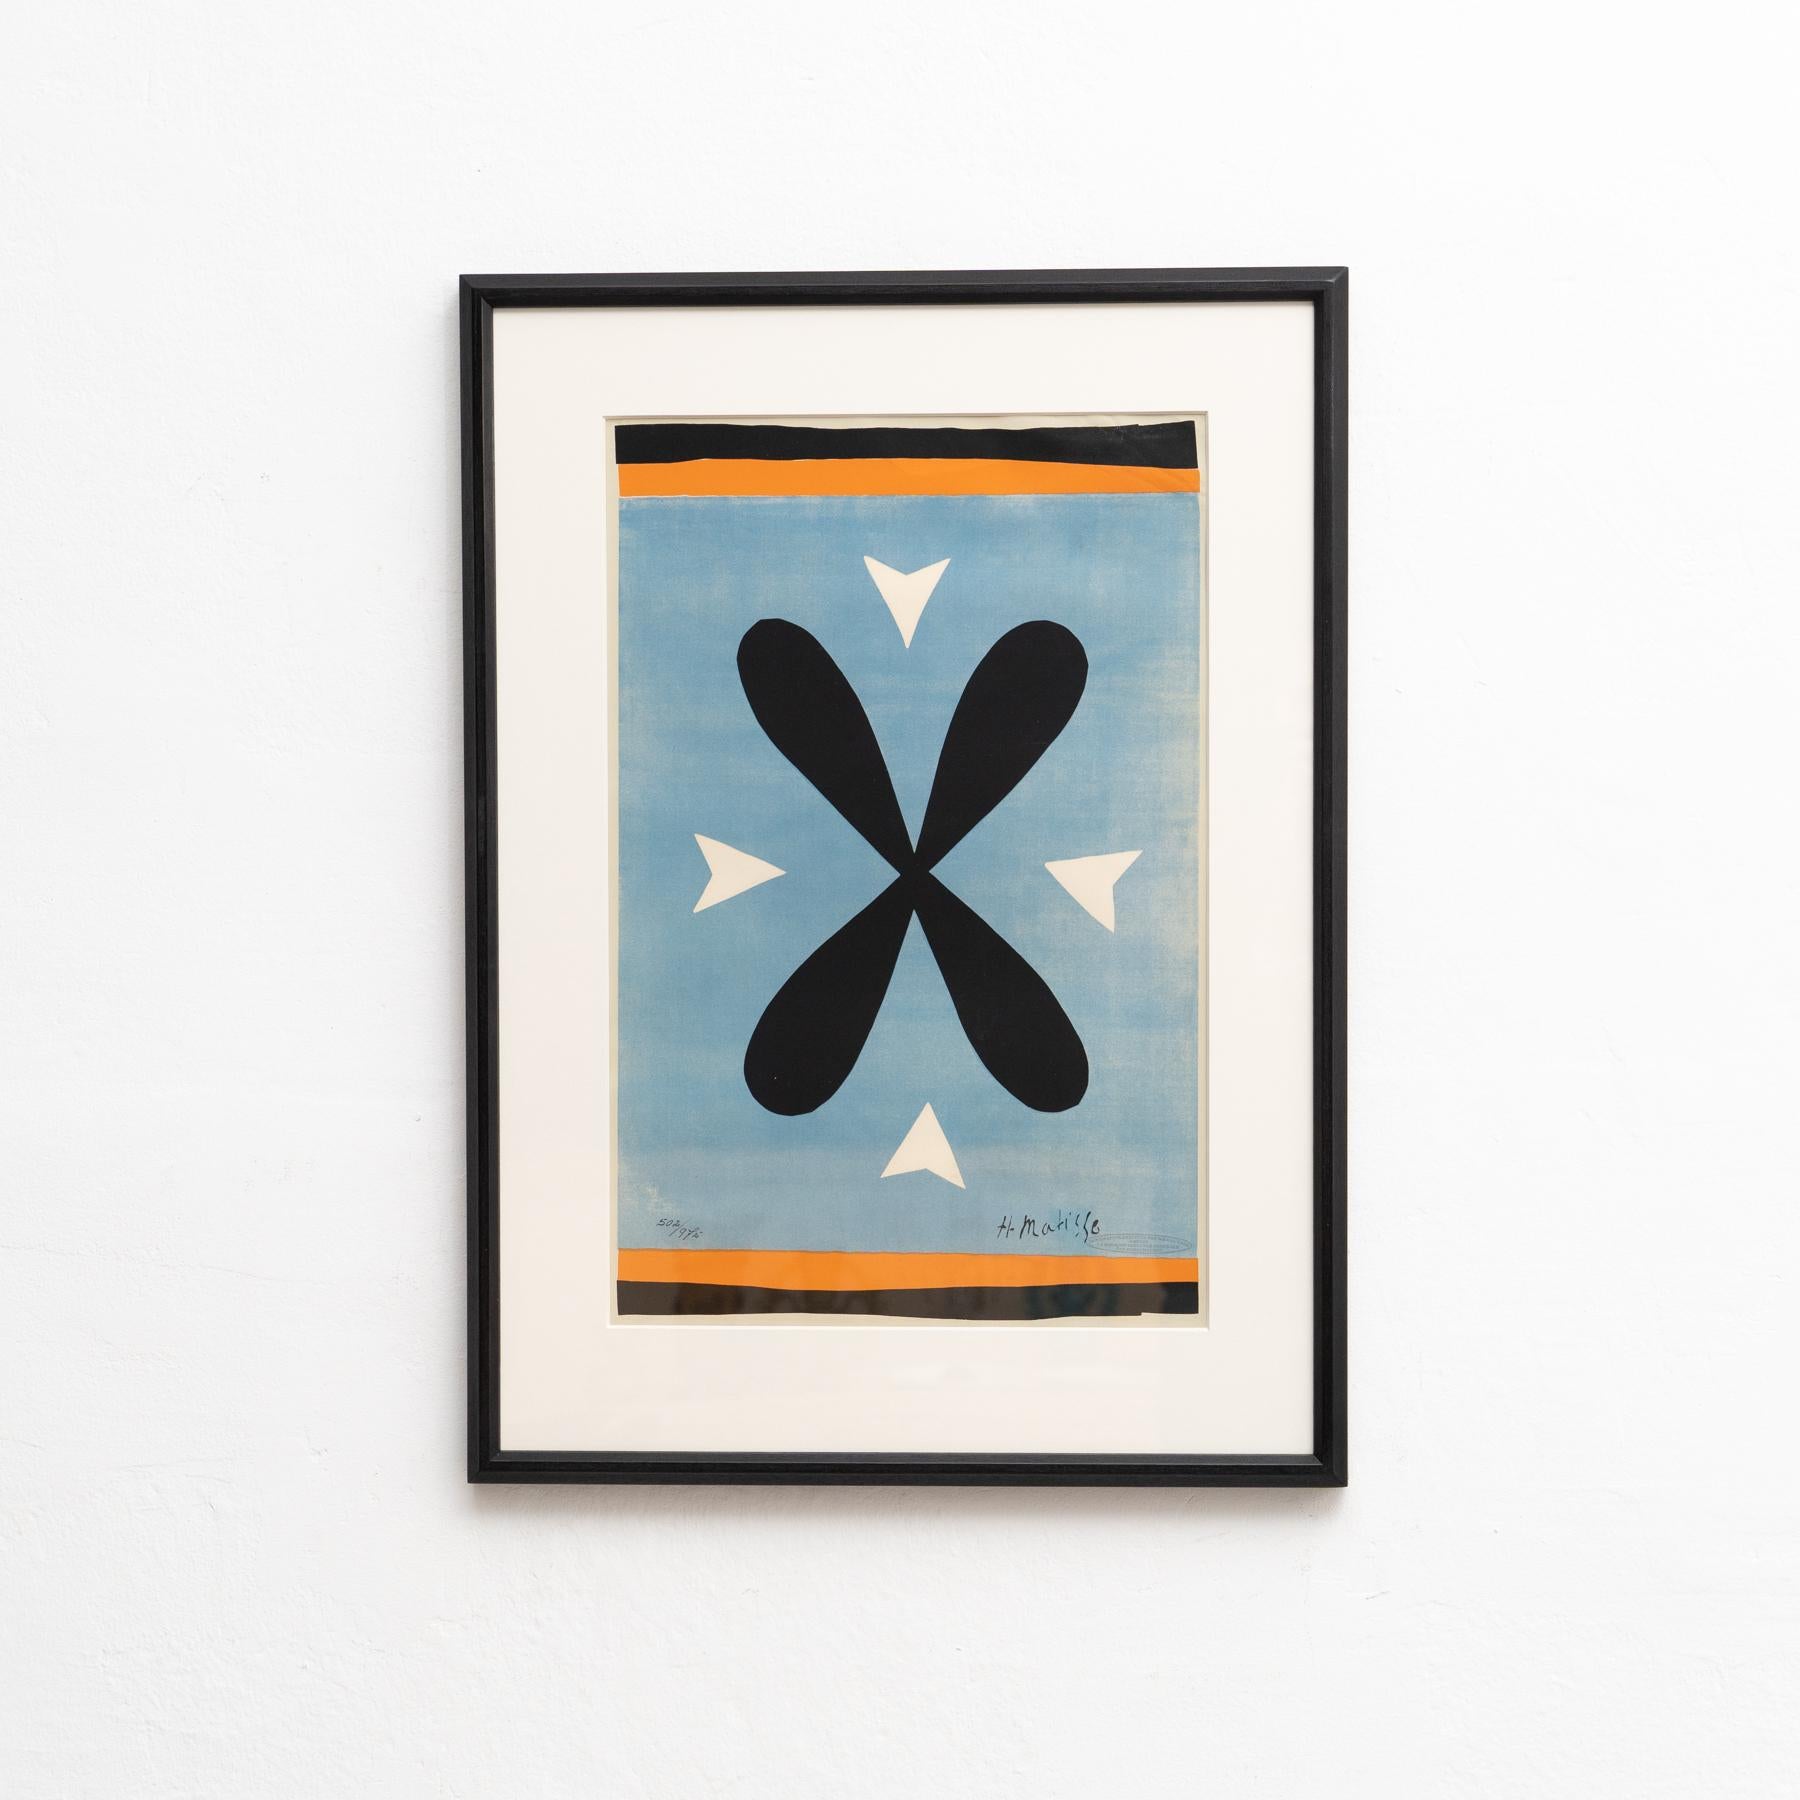 Elevate your art collection with this exquisite framed lithograph, featuring Henry Matisse's iconic piece 